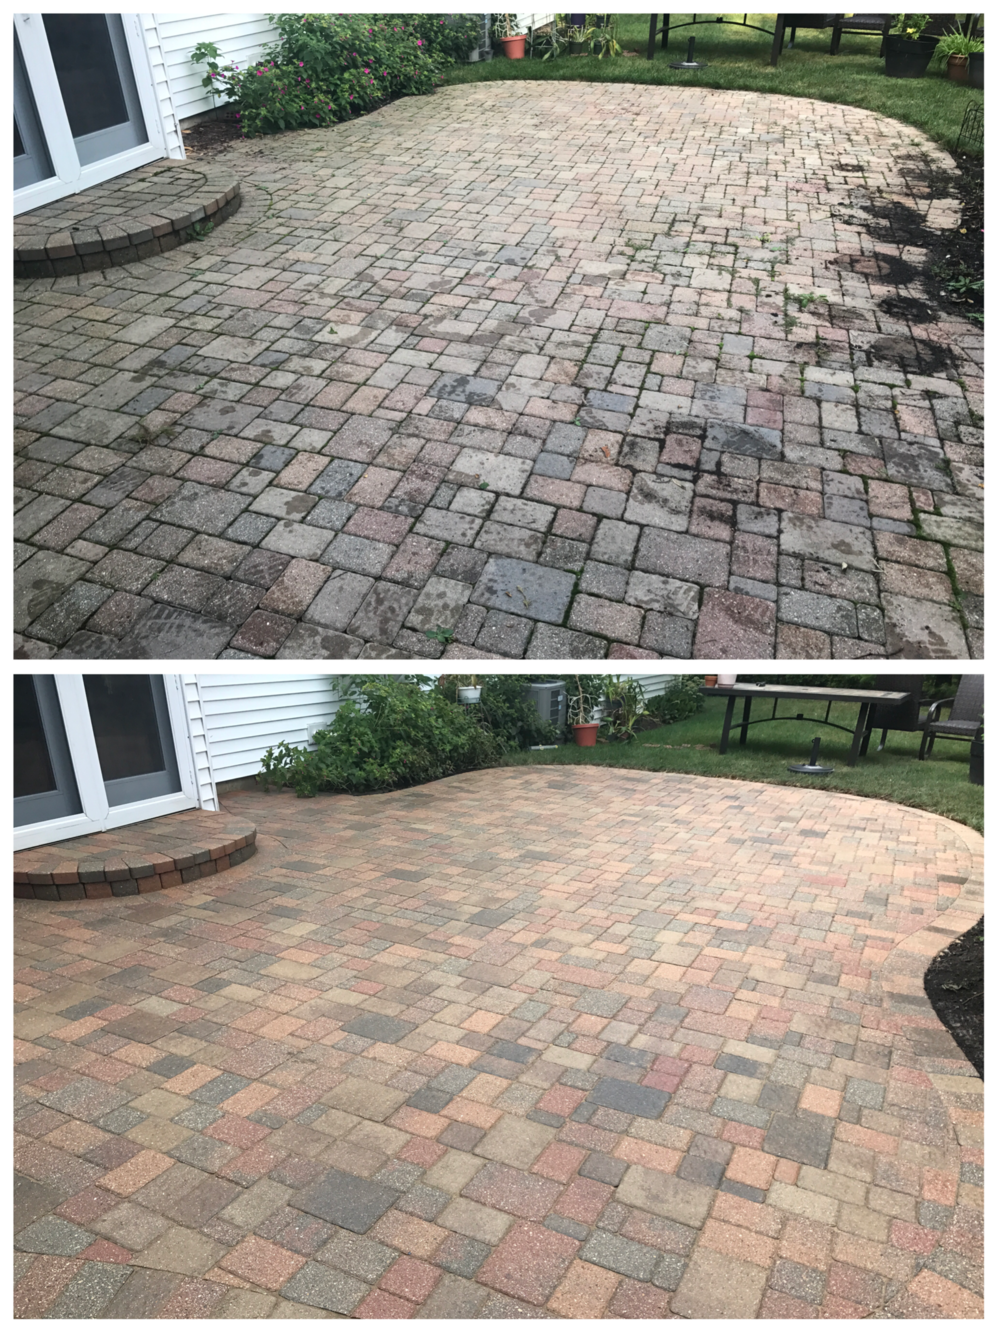 Paver Patio - Before and After